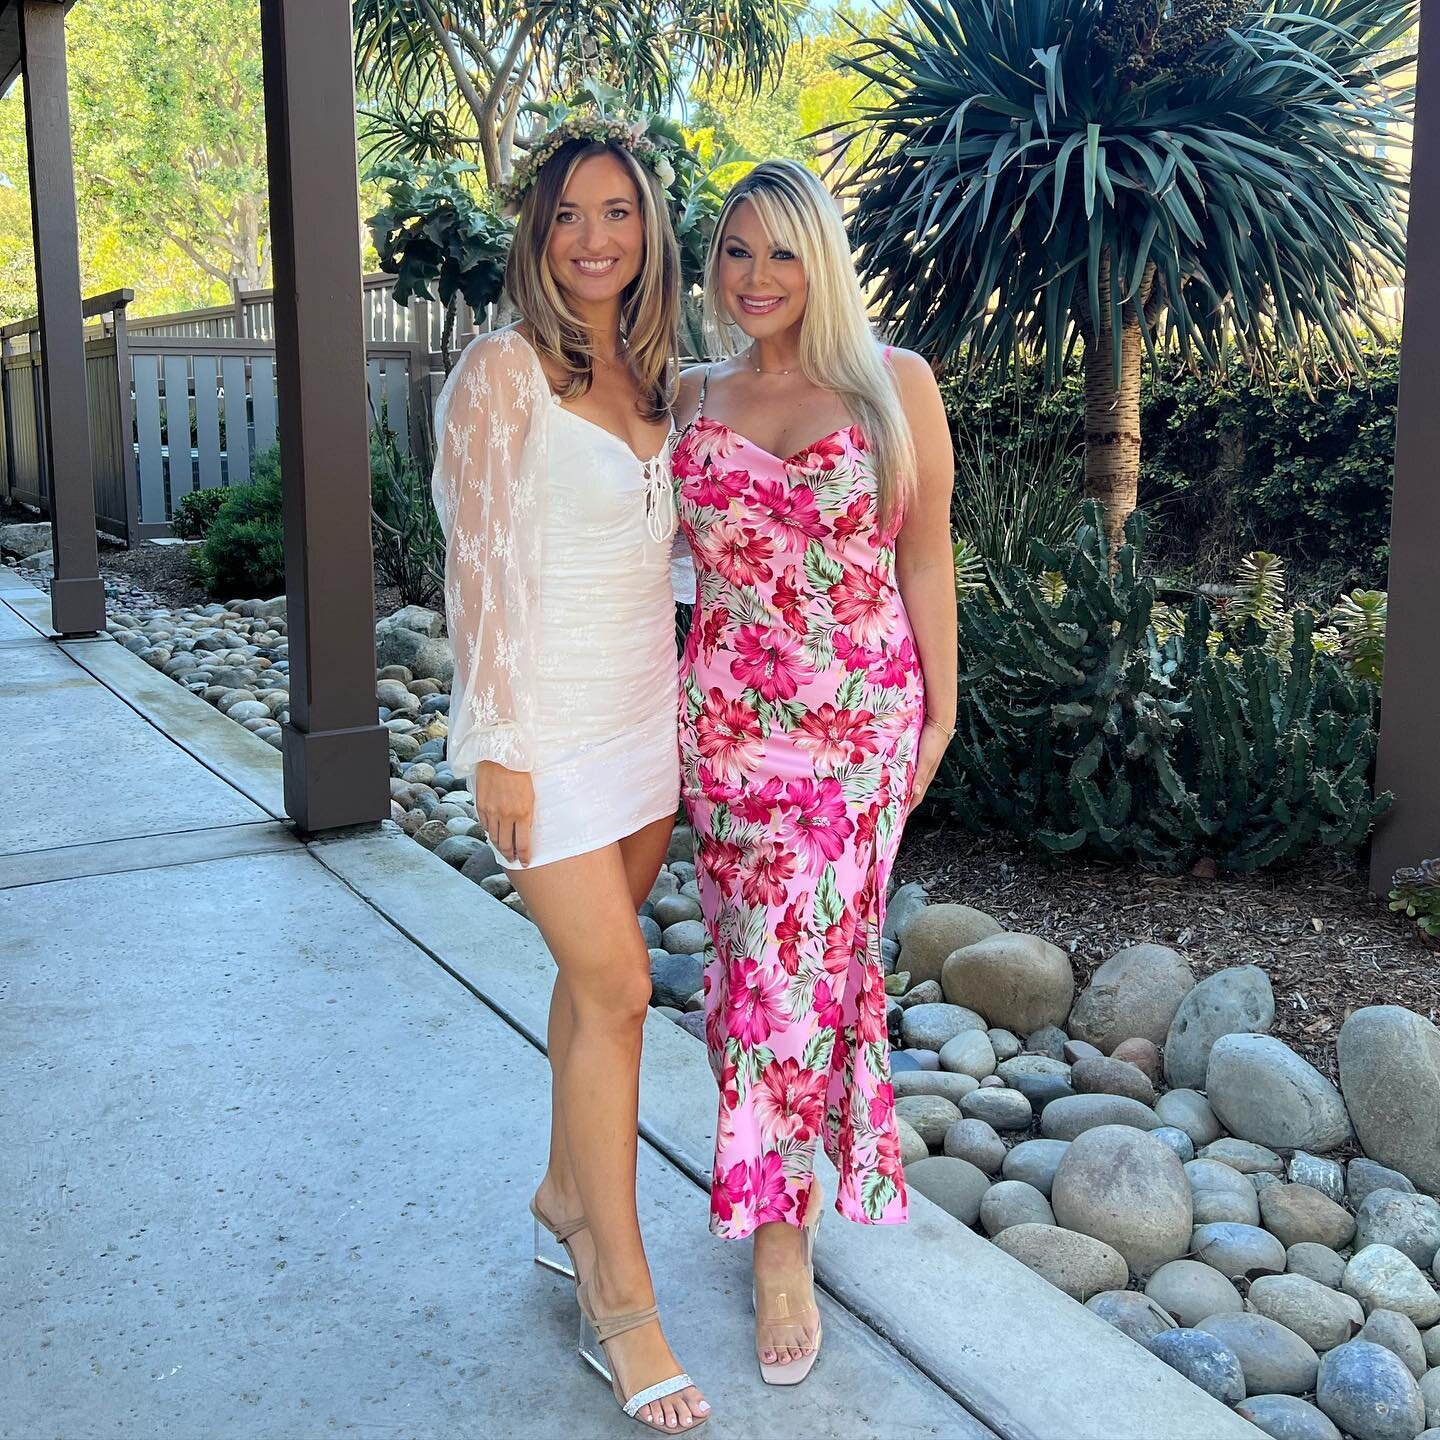 Such a beautiful day celebrating Kaitlyn at her bridal shower!! Love you babe and can&rsquo;t wait to see you get married soon!! ❤️❤️💕❤️❤️ 
@kaitlynweathers